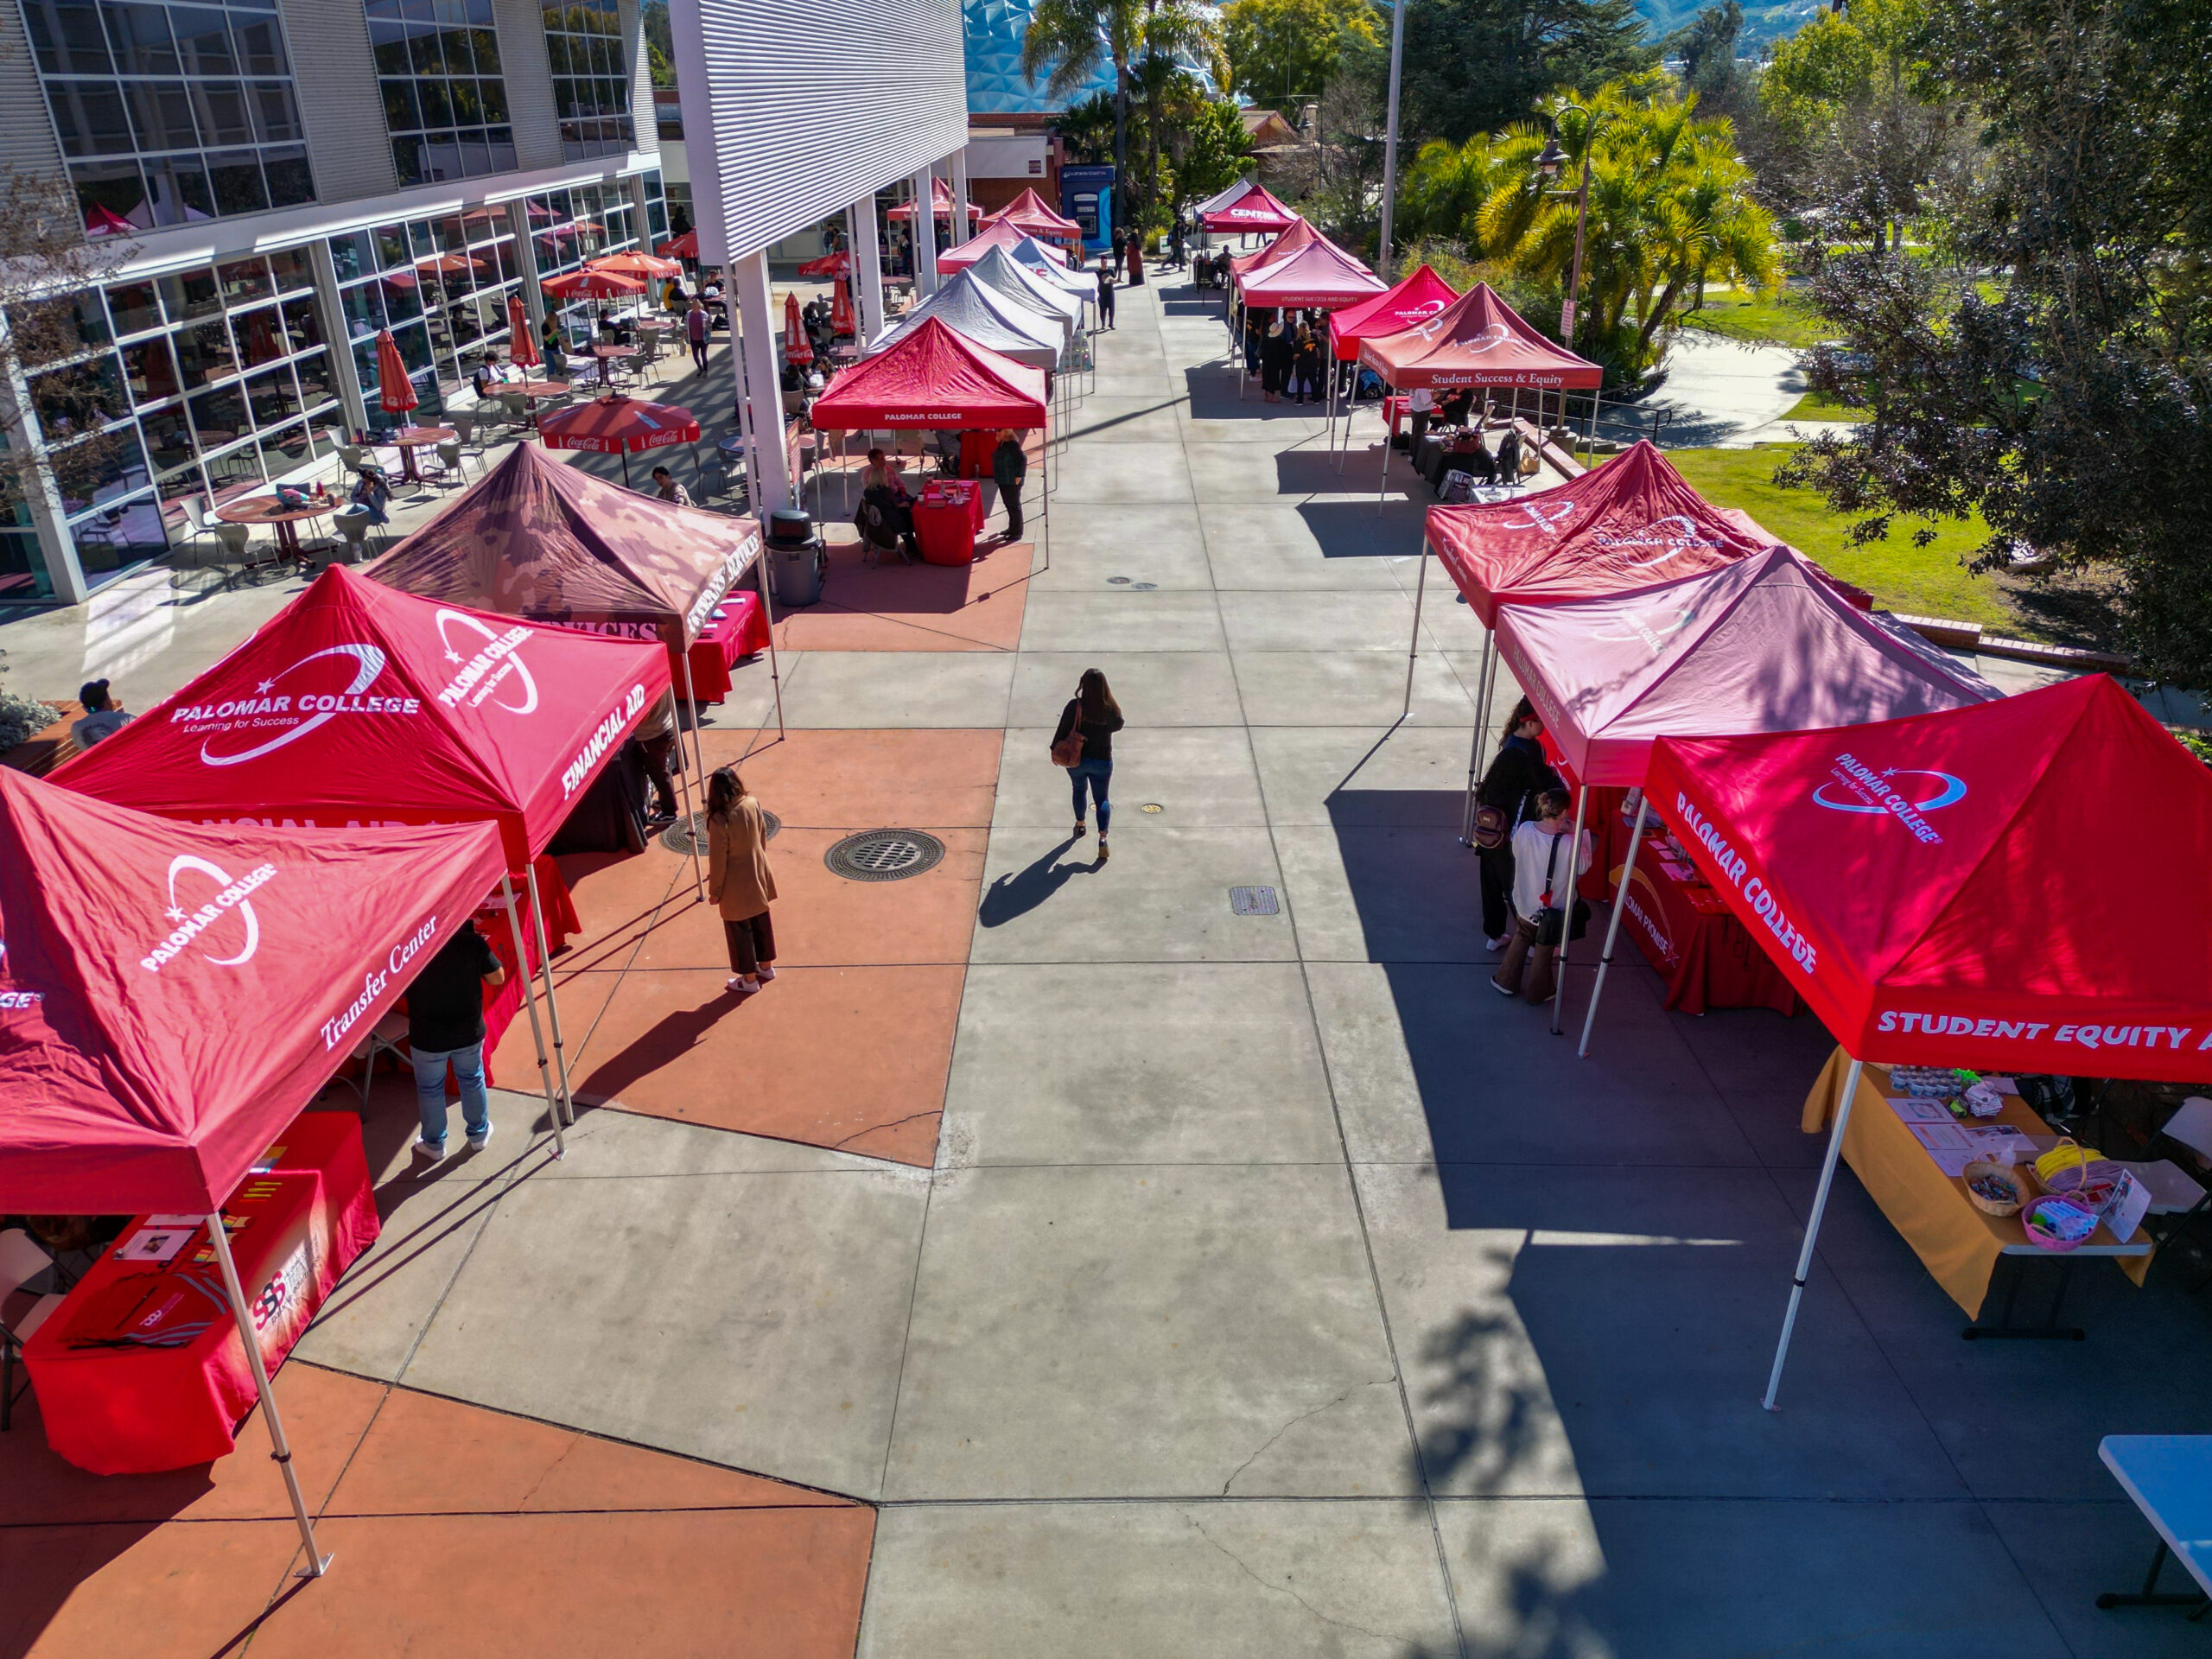 A row of red tents with booths line outside of Palomar College's cafeteria on a sunny day.